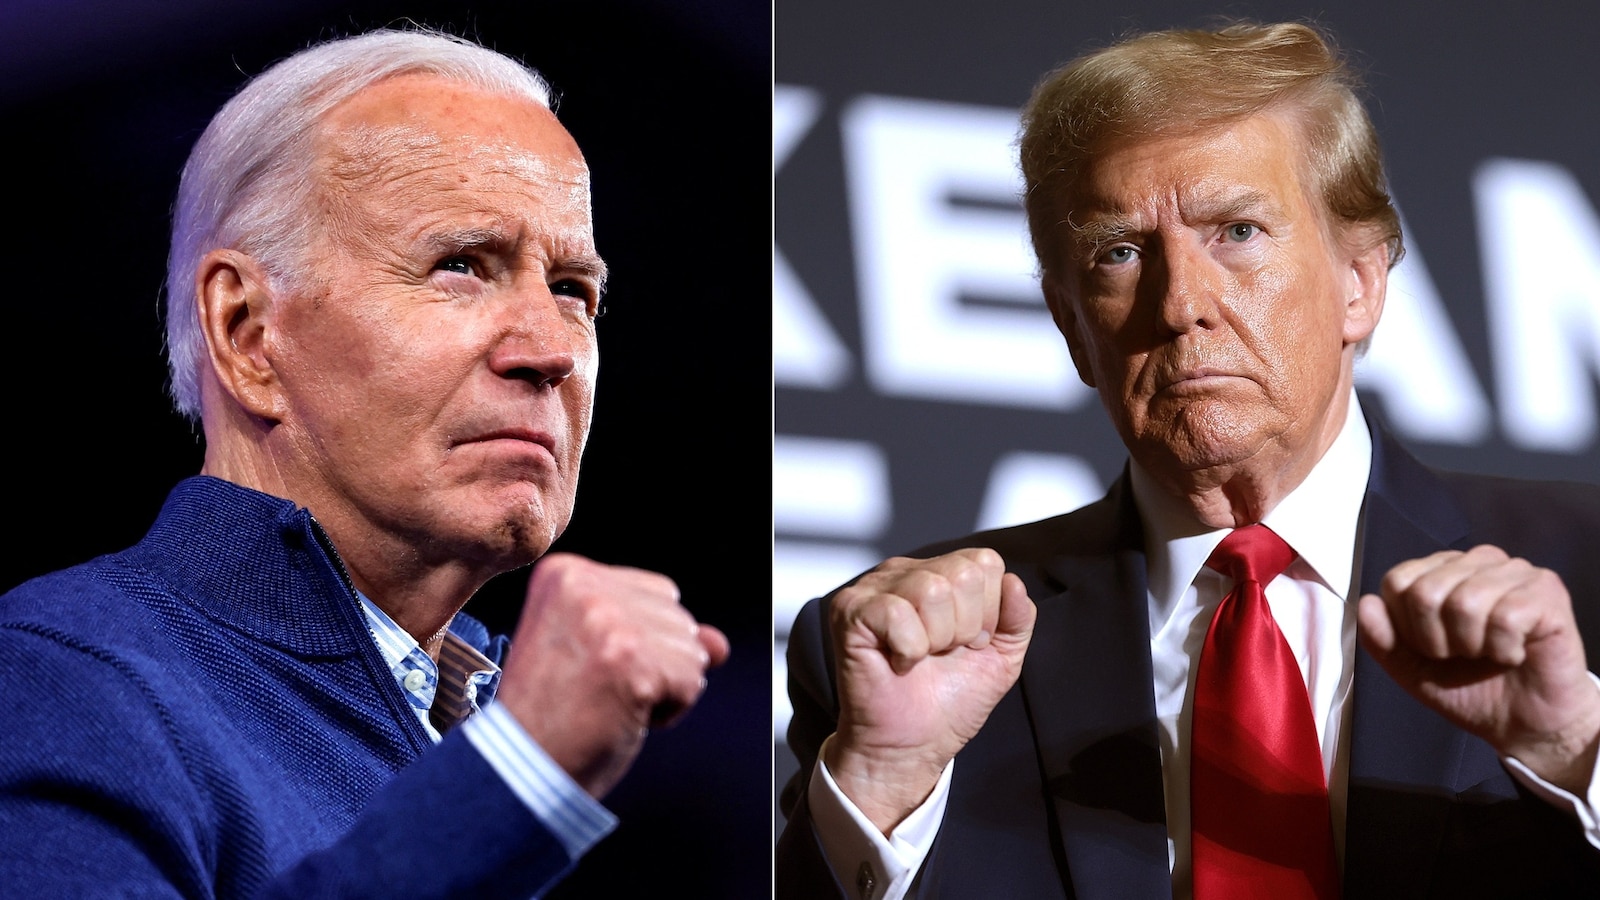 Biden and Trump emerge as frontrunners for 2024 presidential nominations